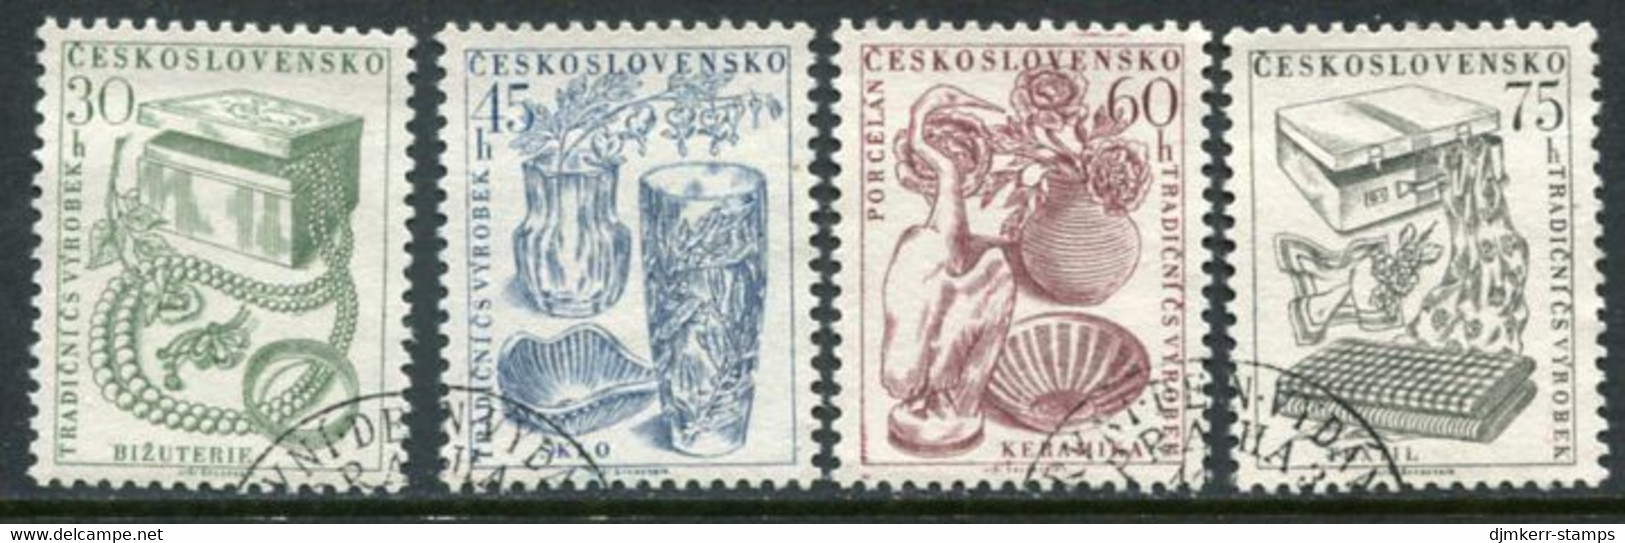 CZECHOSLOVAKIA 1956 Export Products Used.  Michel 954-57 - Usados